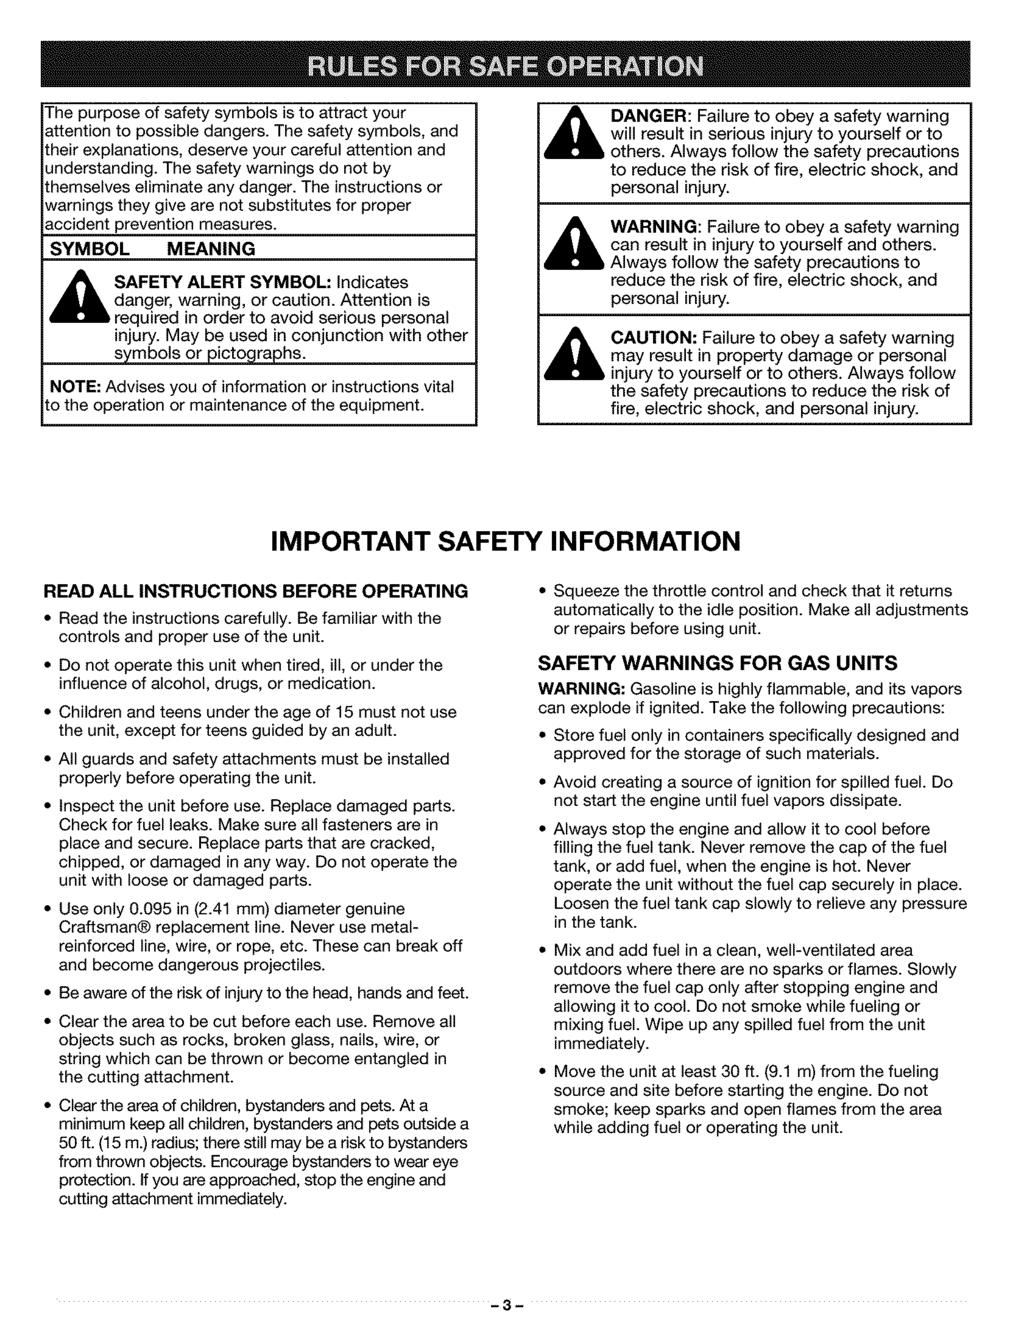 The purpose of safety symbols is to attract your attention to possible dangers. The safety symbols, and their explanations, deserve your careful attention and understanding.